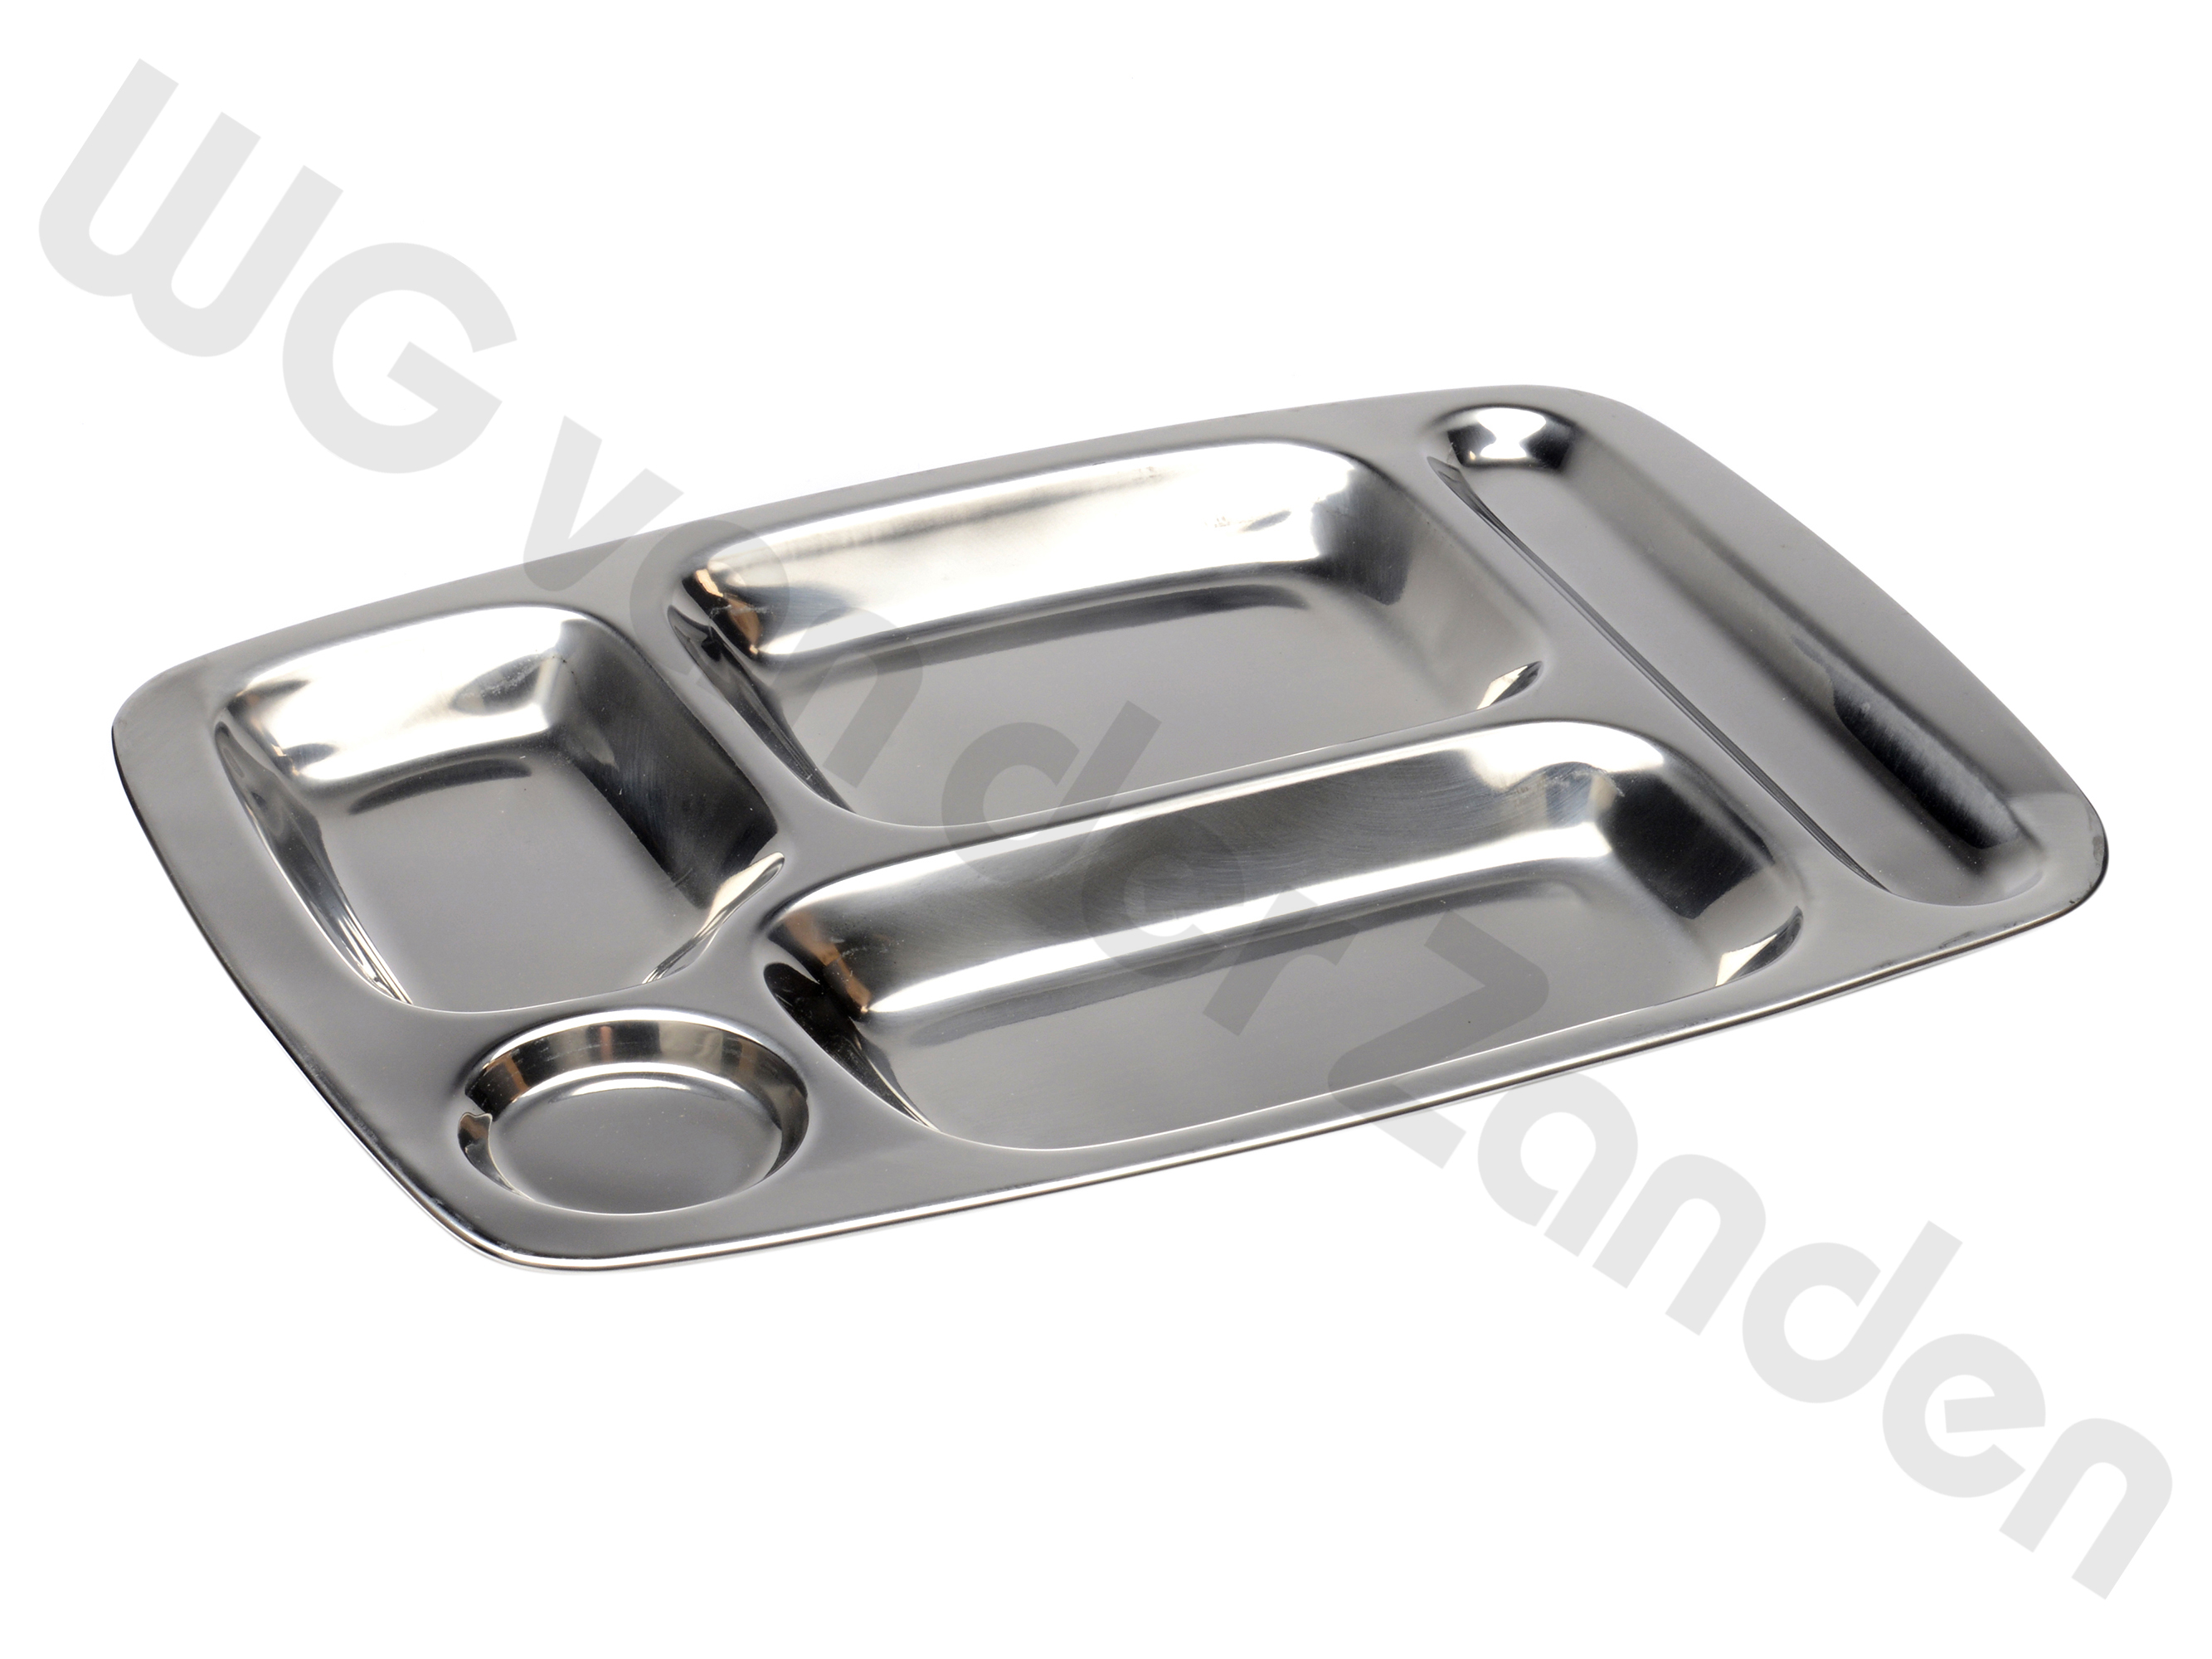 257170 SERVING TRAY S/S 40X28CM 4 DIVIDED